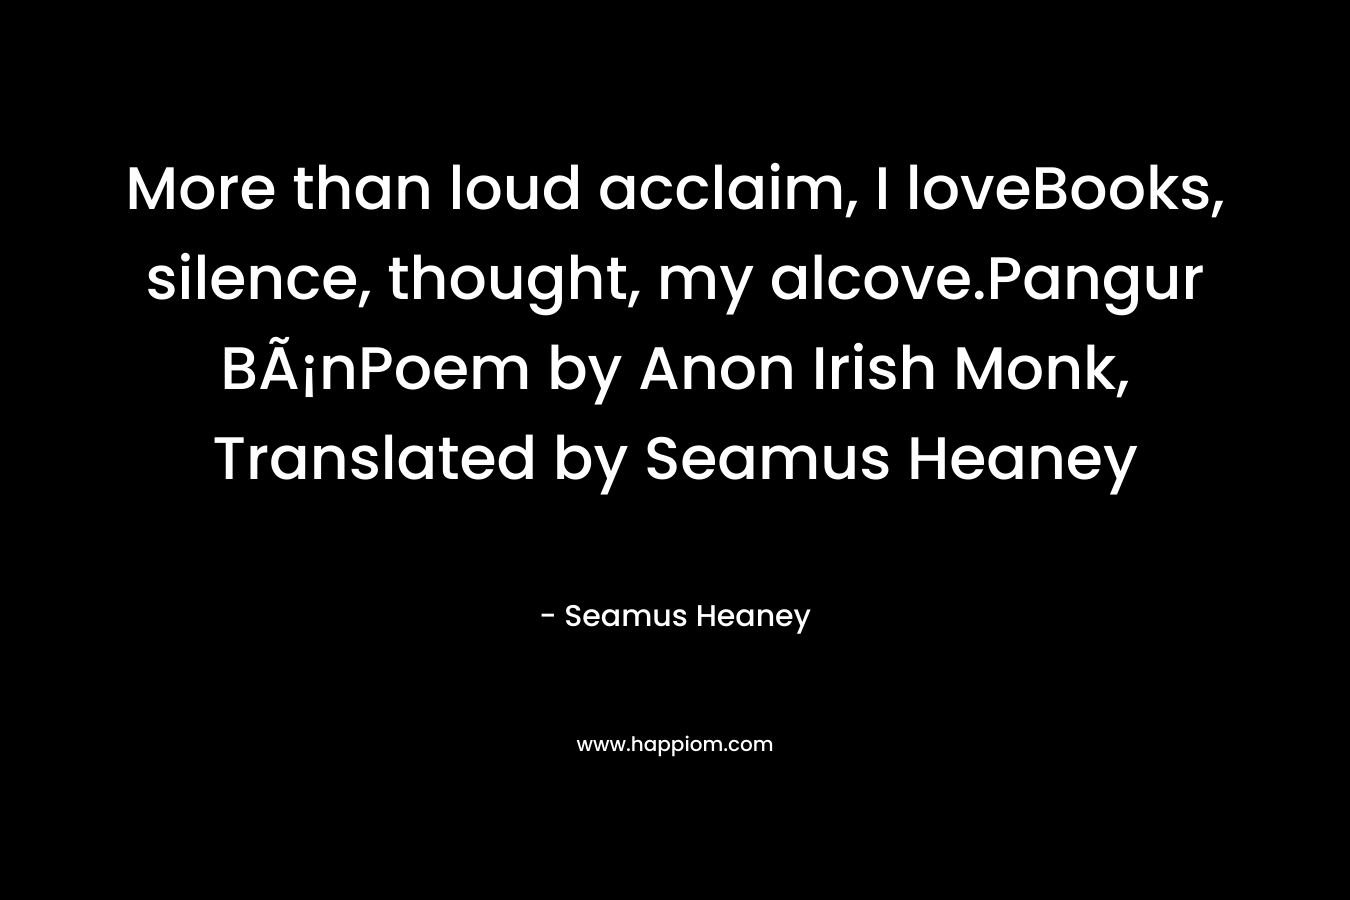 More than loud acclaim, I loveBooks, silence, thought, my alcove.Pangur BÃ¡nPoem by Anon Irish Monk, Translated by Seamus Heaney – Seamus Heaney